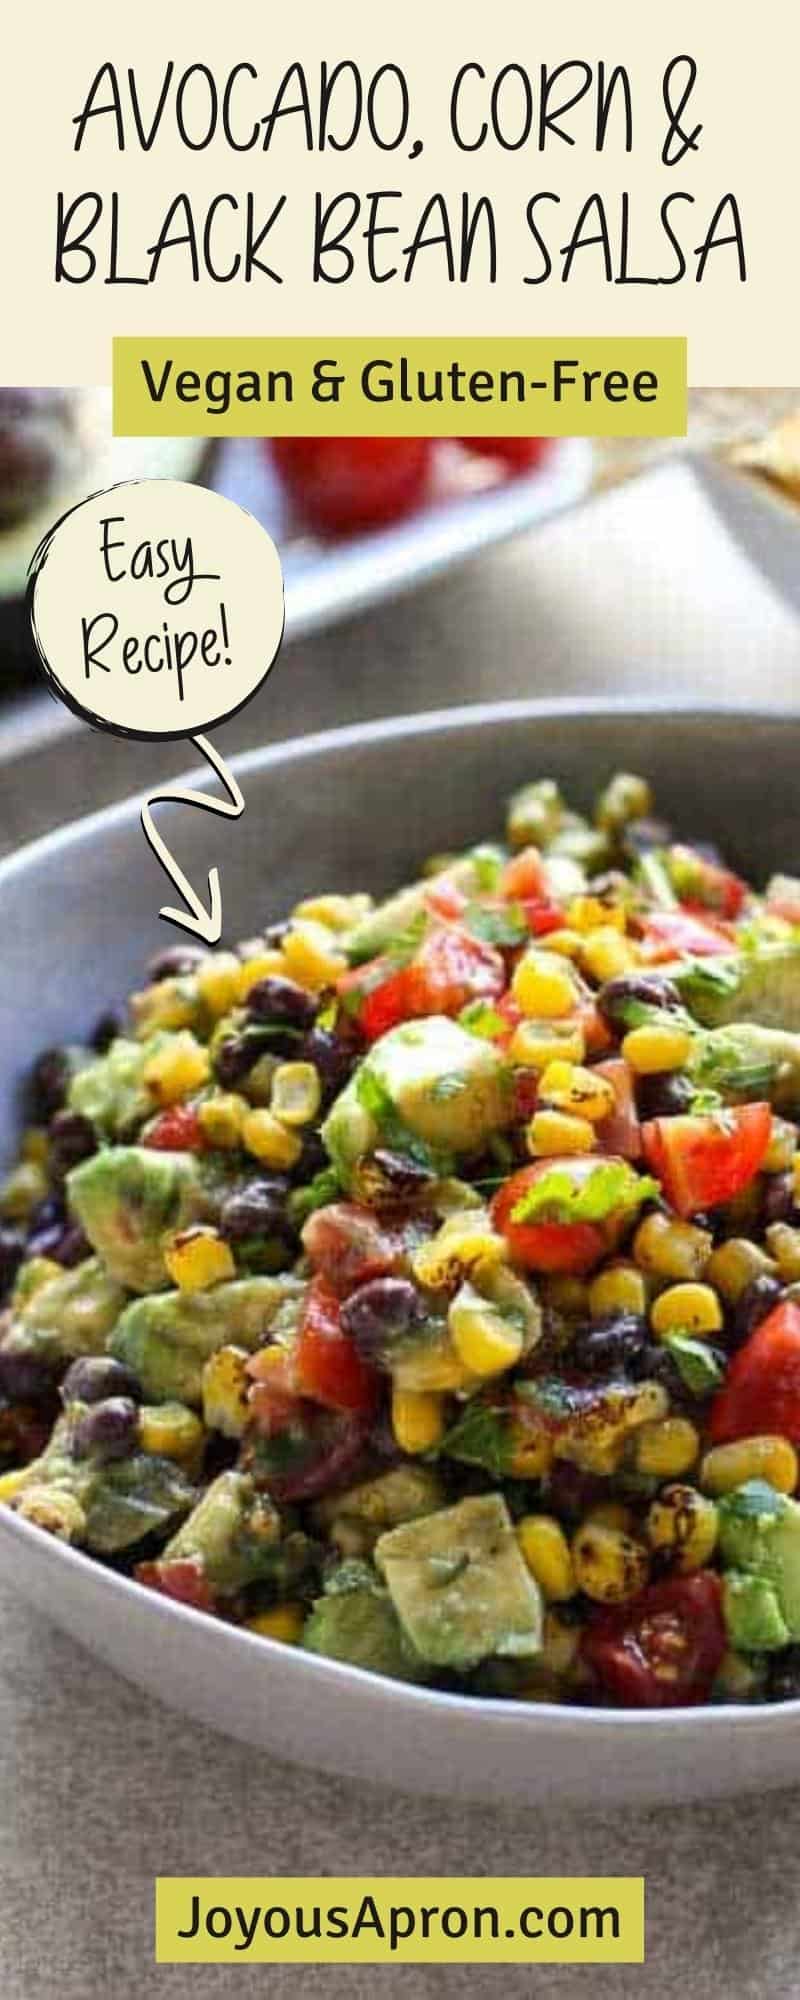 Avocado Corn and Black Bean Salsa - appetizer, side dish and dip that is fresh, easy, no-cook, and healthy. Perfect for game day, parties and showers! Vegan, vegetarian, gluten free friendly. via @joyousapron